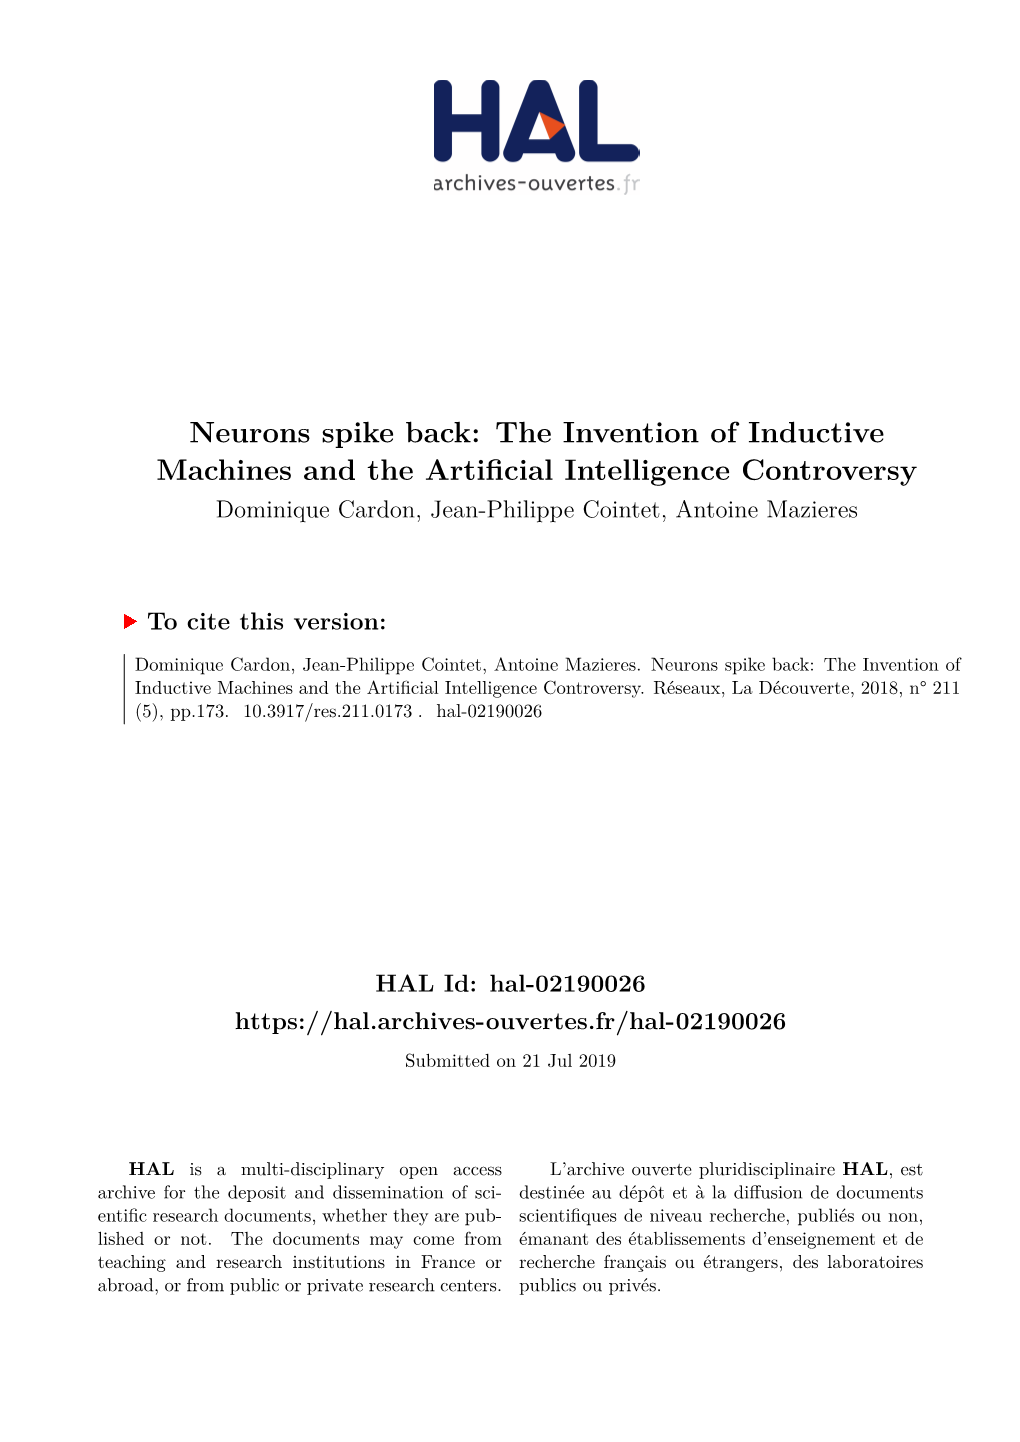 Neurons Spike Back: the Invention of Inductive Machines and the Artificial Intelligence Controversy Dominique Cardon, Jean-Philippe Cointet, Antoine Mazieres